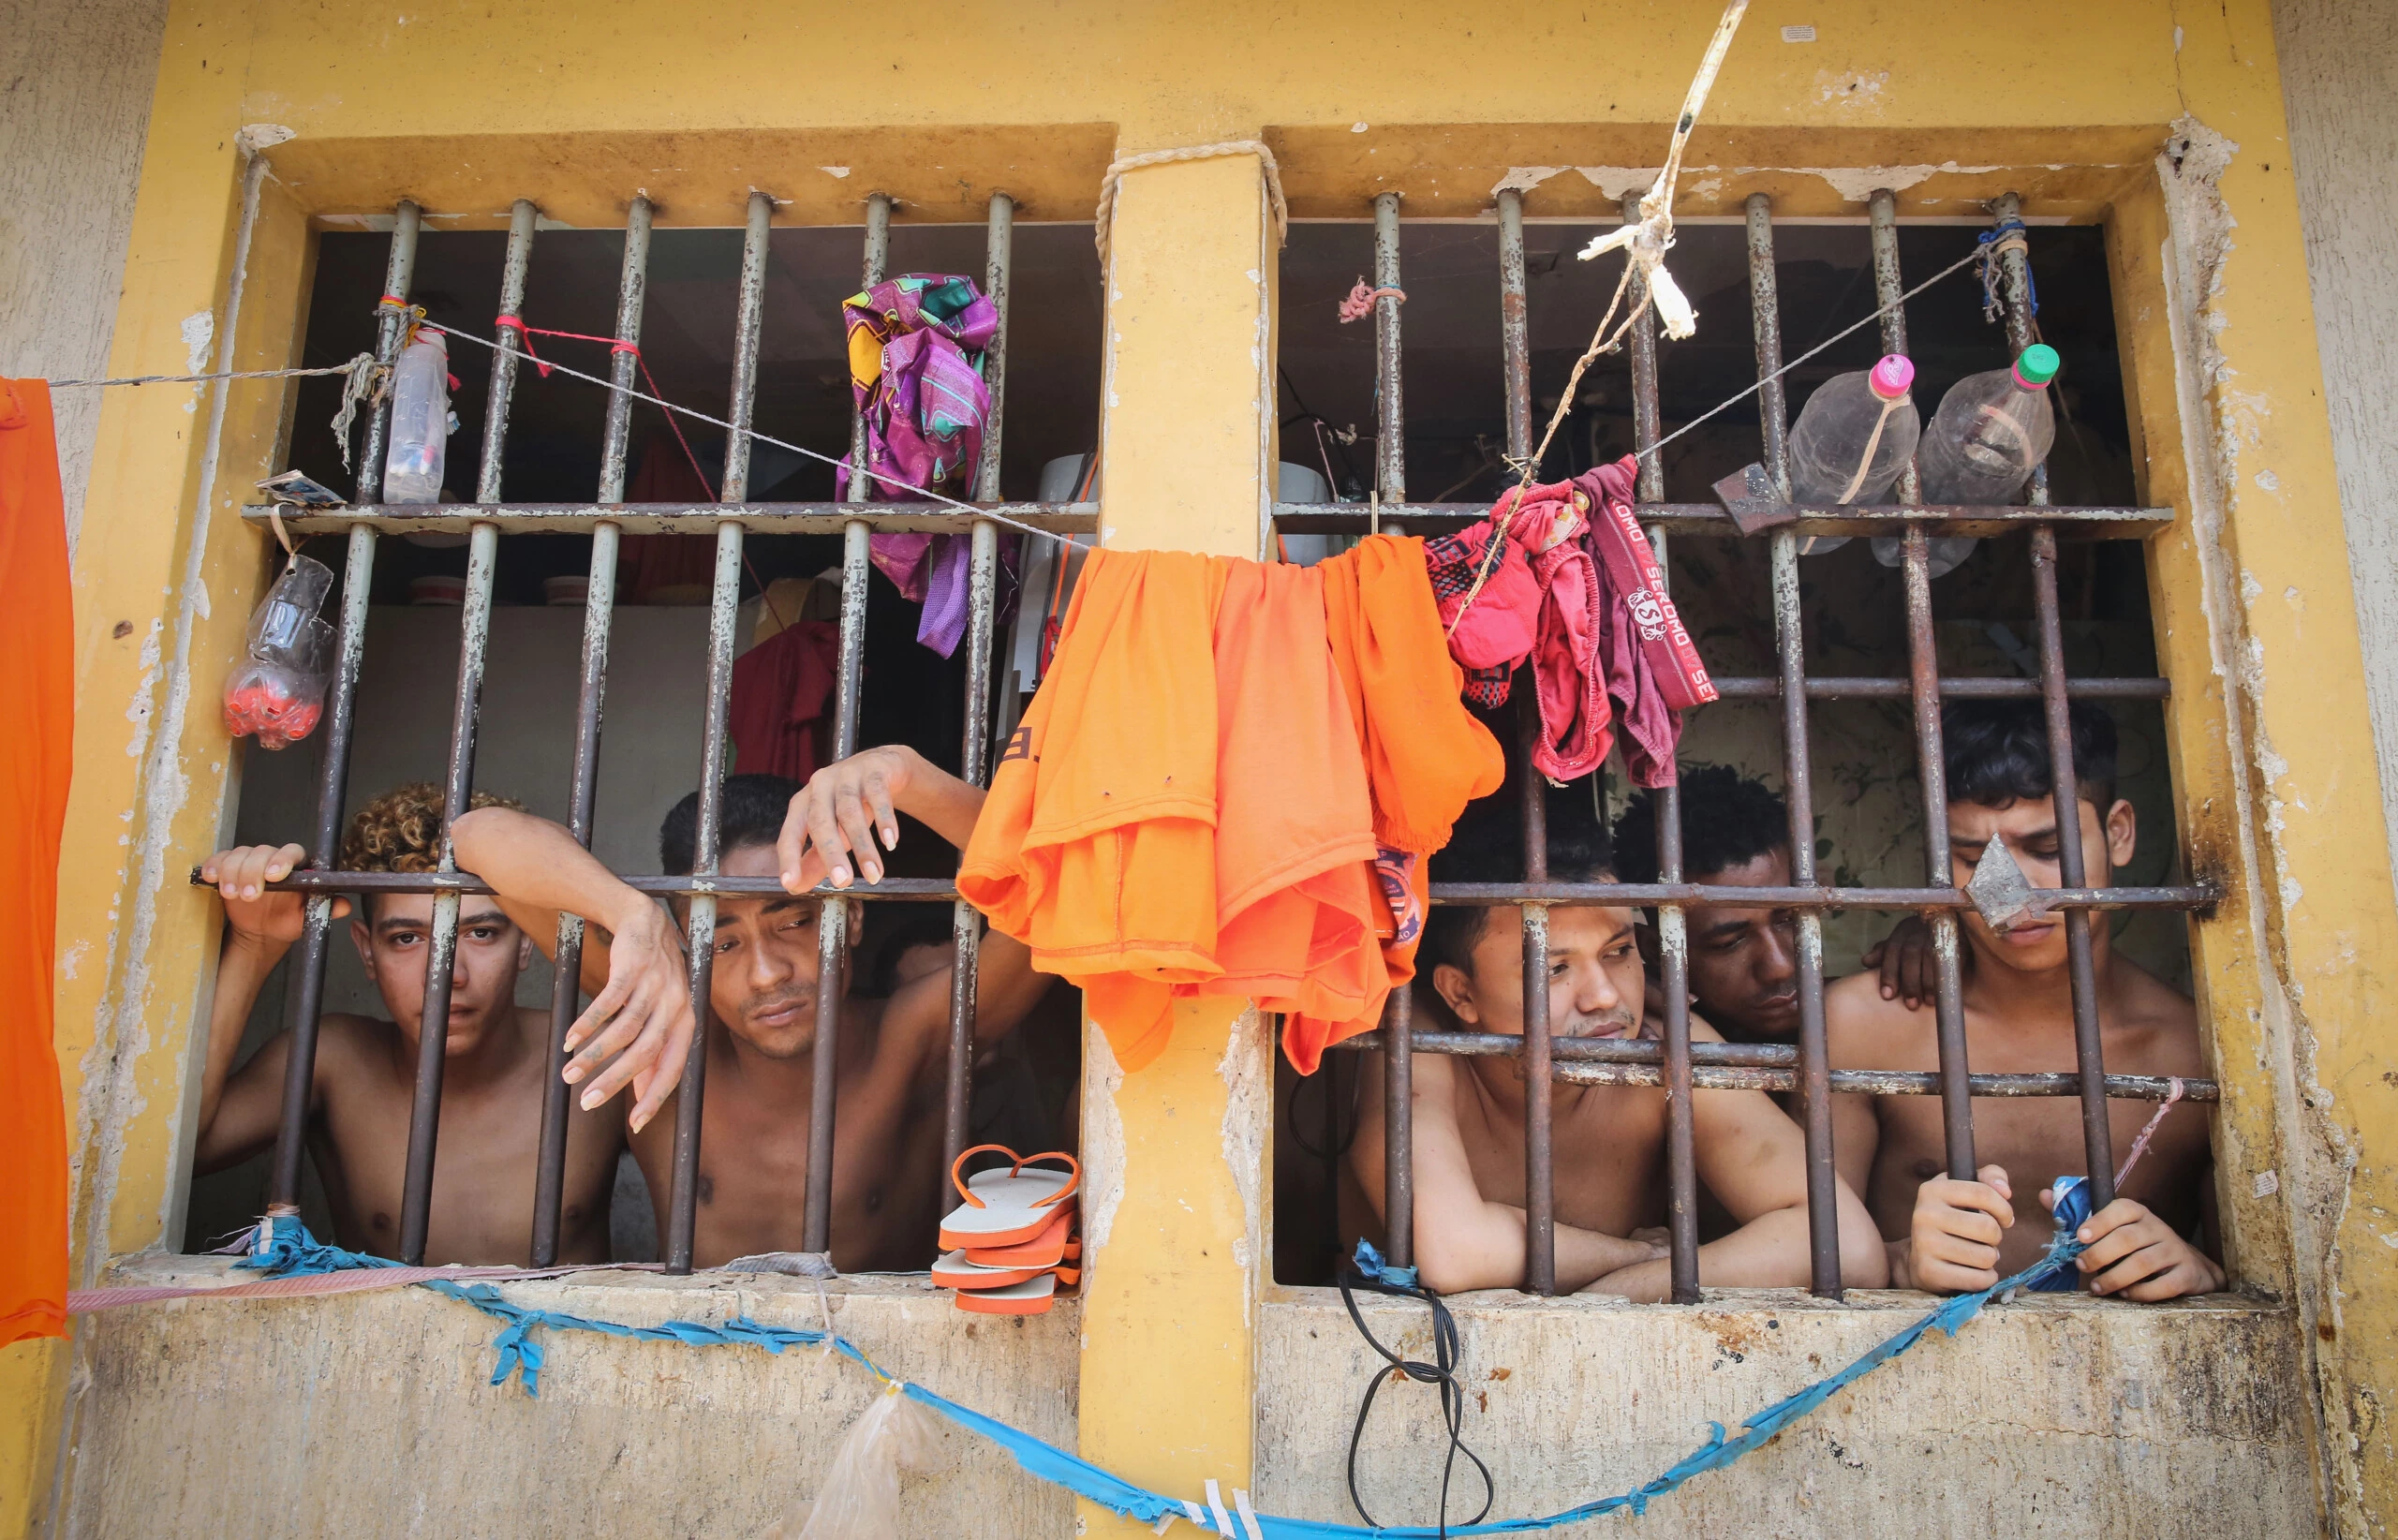 SAO LUIS, BRAZIL - JANUARY 27:  Inmates stand in their cell in the Pedrinhas Prison Complex, the largest penitentiary in Maranhao state, on January 27, 2015 in Sao Luis, Brazil. Previously one of the most violent prisons in Brazil, Pedrinhas has seen efforts from a new state administration, new prison officials and judiciary leaders from Maranhao which appear to have quelled some of the unrest within the complex. In 2013, nearly 60 inmates were killed within the complex, including three who were beheaded during rioting. Much of the violence stemmed from broken cells allowing inmates and gang rivals to mix in the patios and open spaces of the complex. Officials recently repaired and repopulated the cells allowing law enforcement access and decreasing violence among prisoners, according to officials. Other reforms include a policy of custody hearings and real-time camera feeds. According to officials there have been no prisoner on prisoner killings inside the complex in nearly four months. Critics believe overcrowding is one of the primary causes of rioting and violence in Brazil's prisons. Additionally, overcrowding has strengthened prison gangs which now span the country and contol certain peripheries of cities including Rio de Janeiro, Sao Paulo and Sao Luis. Brazil now has the fourth-largest prison population in the world behind the U.S., Russia and China. The population of those imprisoned had quadrupled in the past twenty years to around 550,000 and the country needs at least 200,000 new incarceration spaces to eliminate overcrowding. A vast increase in minor drug arrests, a dearth of legal advice for prisoners and a lack of political will for new prisons have contributed to the increases.  (Photo by Mario Tama/Getty Images)